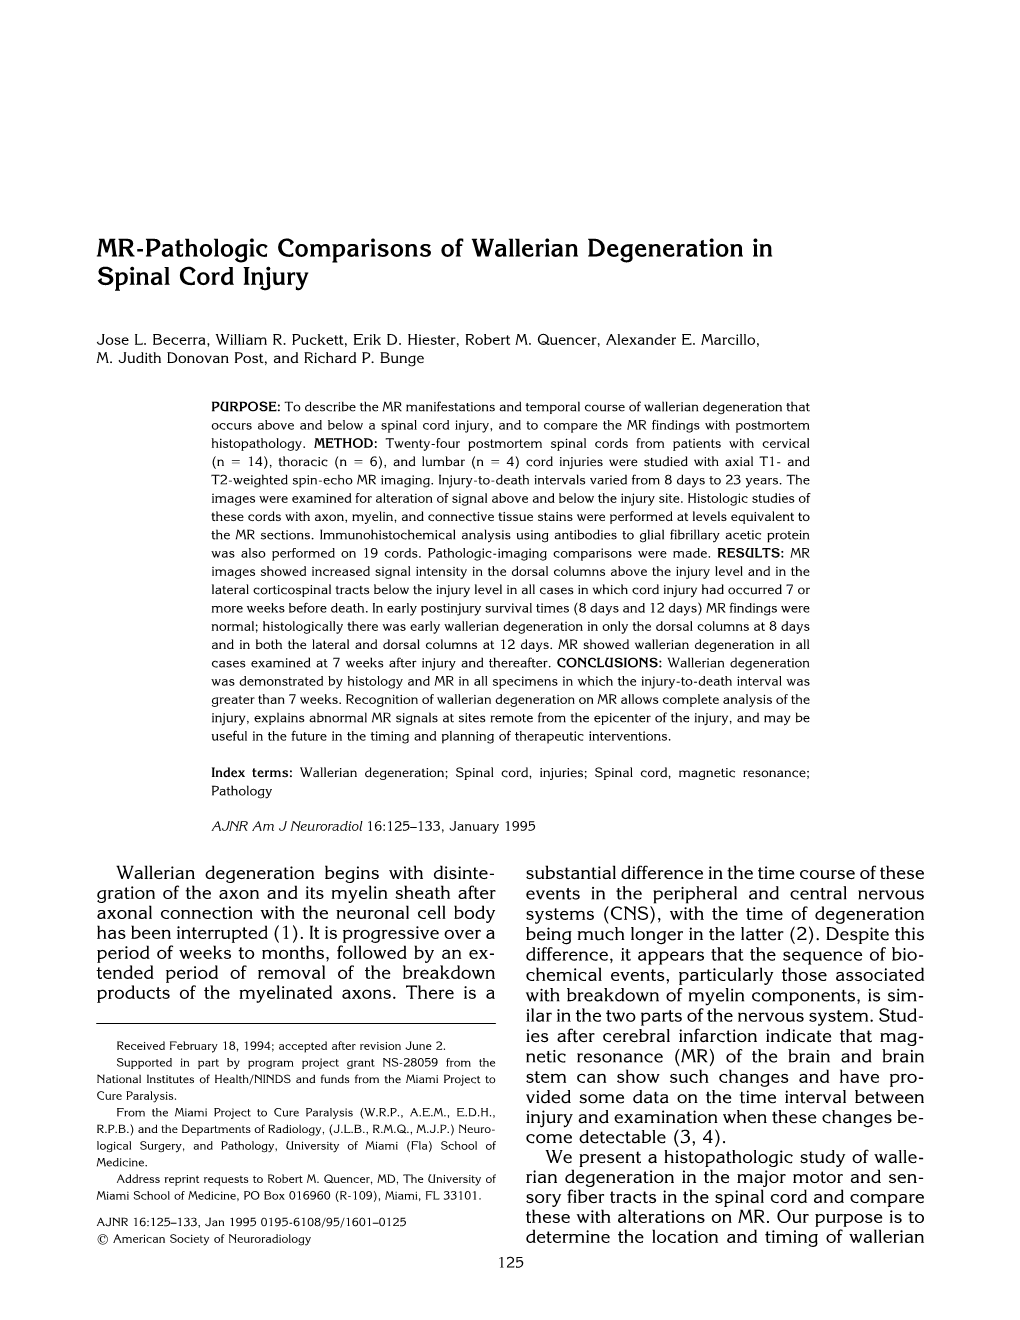 MR-Pathologic Comparisons of Wallerian Degeneration in Spinal Cord Injury